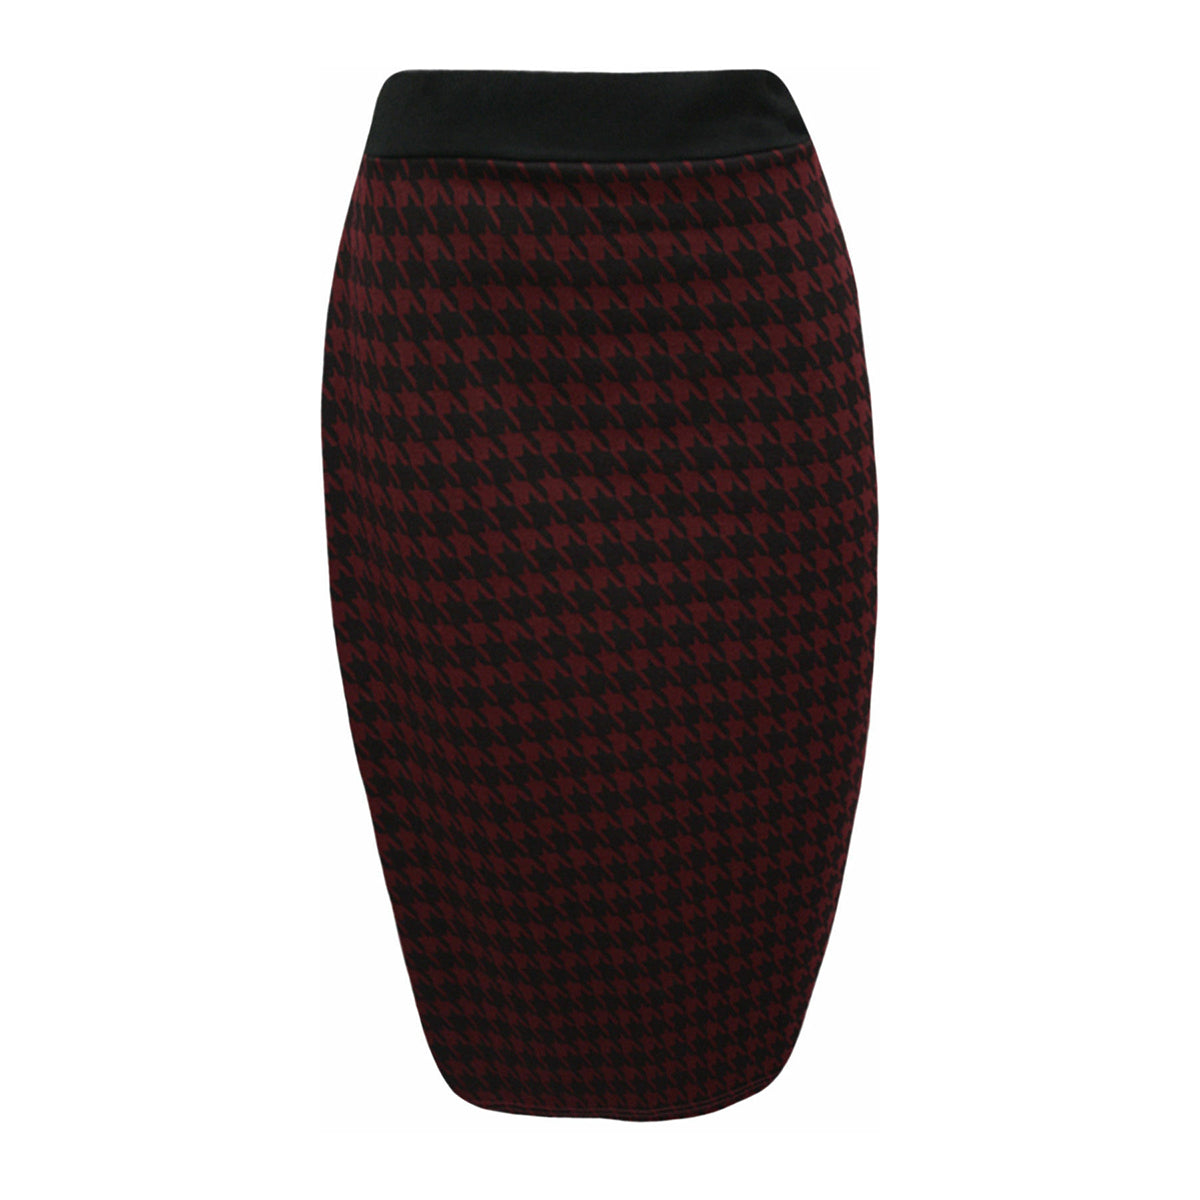 DOGTOOTH CHECK ELASTIC WAIST FITTED PENCIL SKIRT